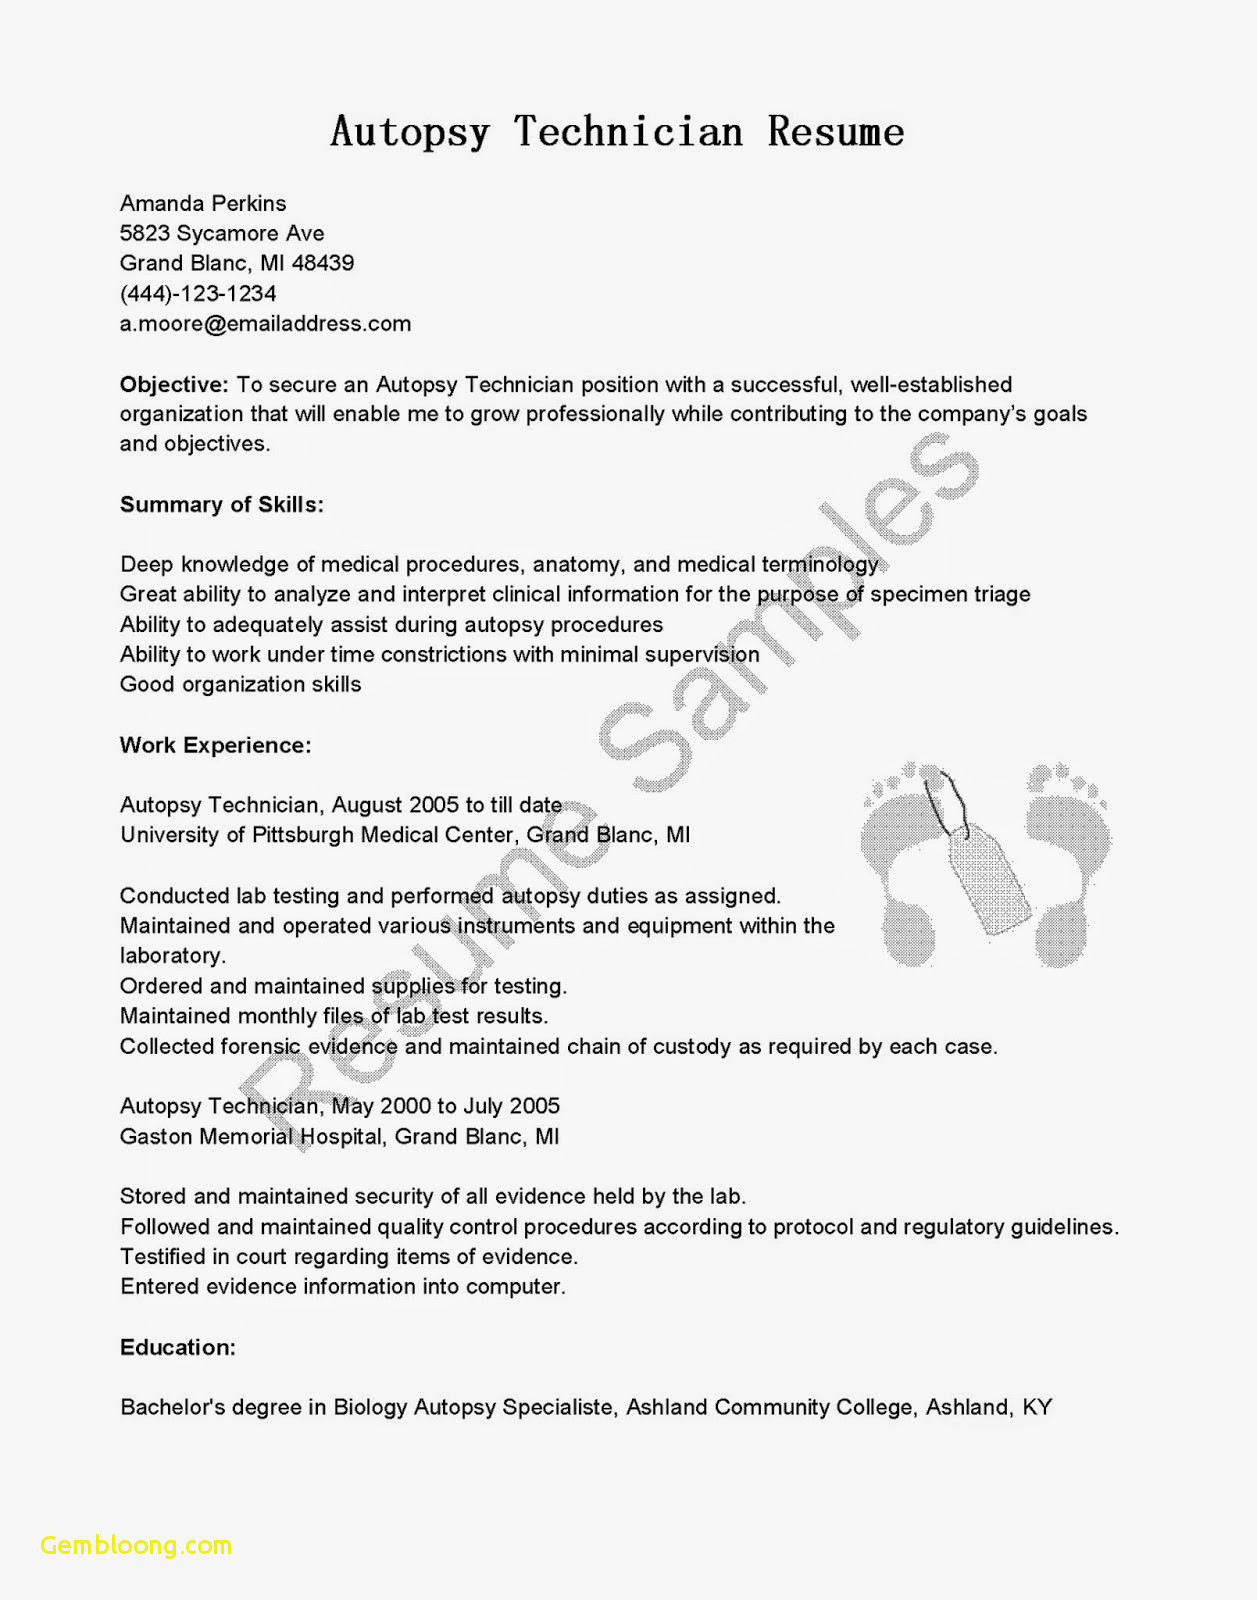 Microsoft Word Resume Cover Letter Template - Word Resume Template New Executive Resume Templates Word Od